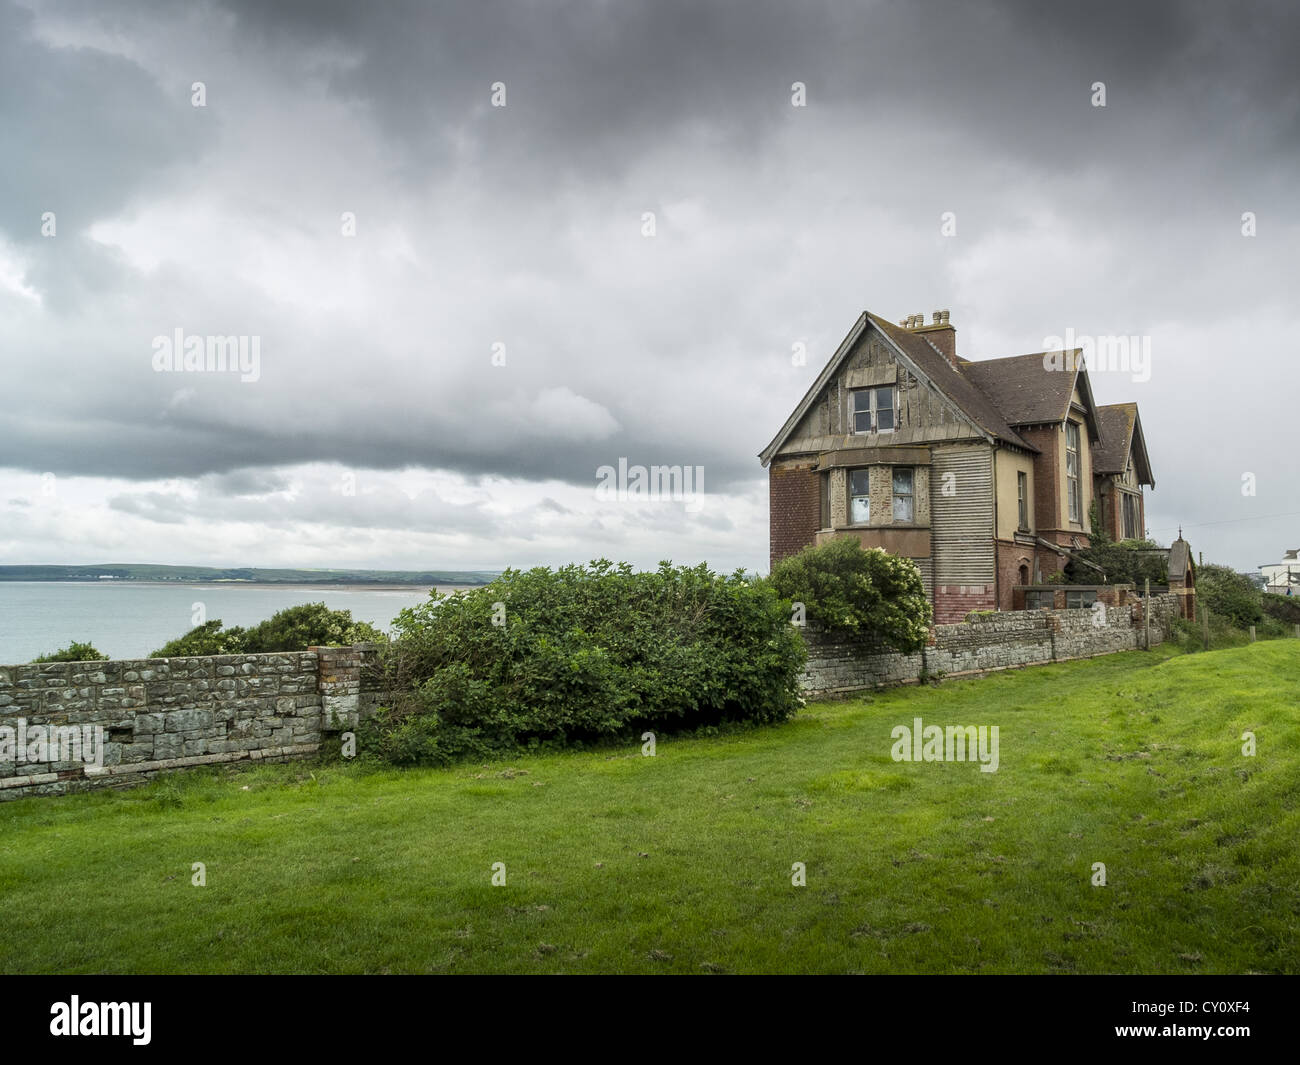 An abandoned derelict spooky looking house on a cliff edge under storm threatening skies. Westward Ho! North Devon. UK Stock Photo